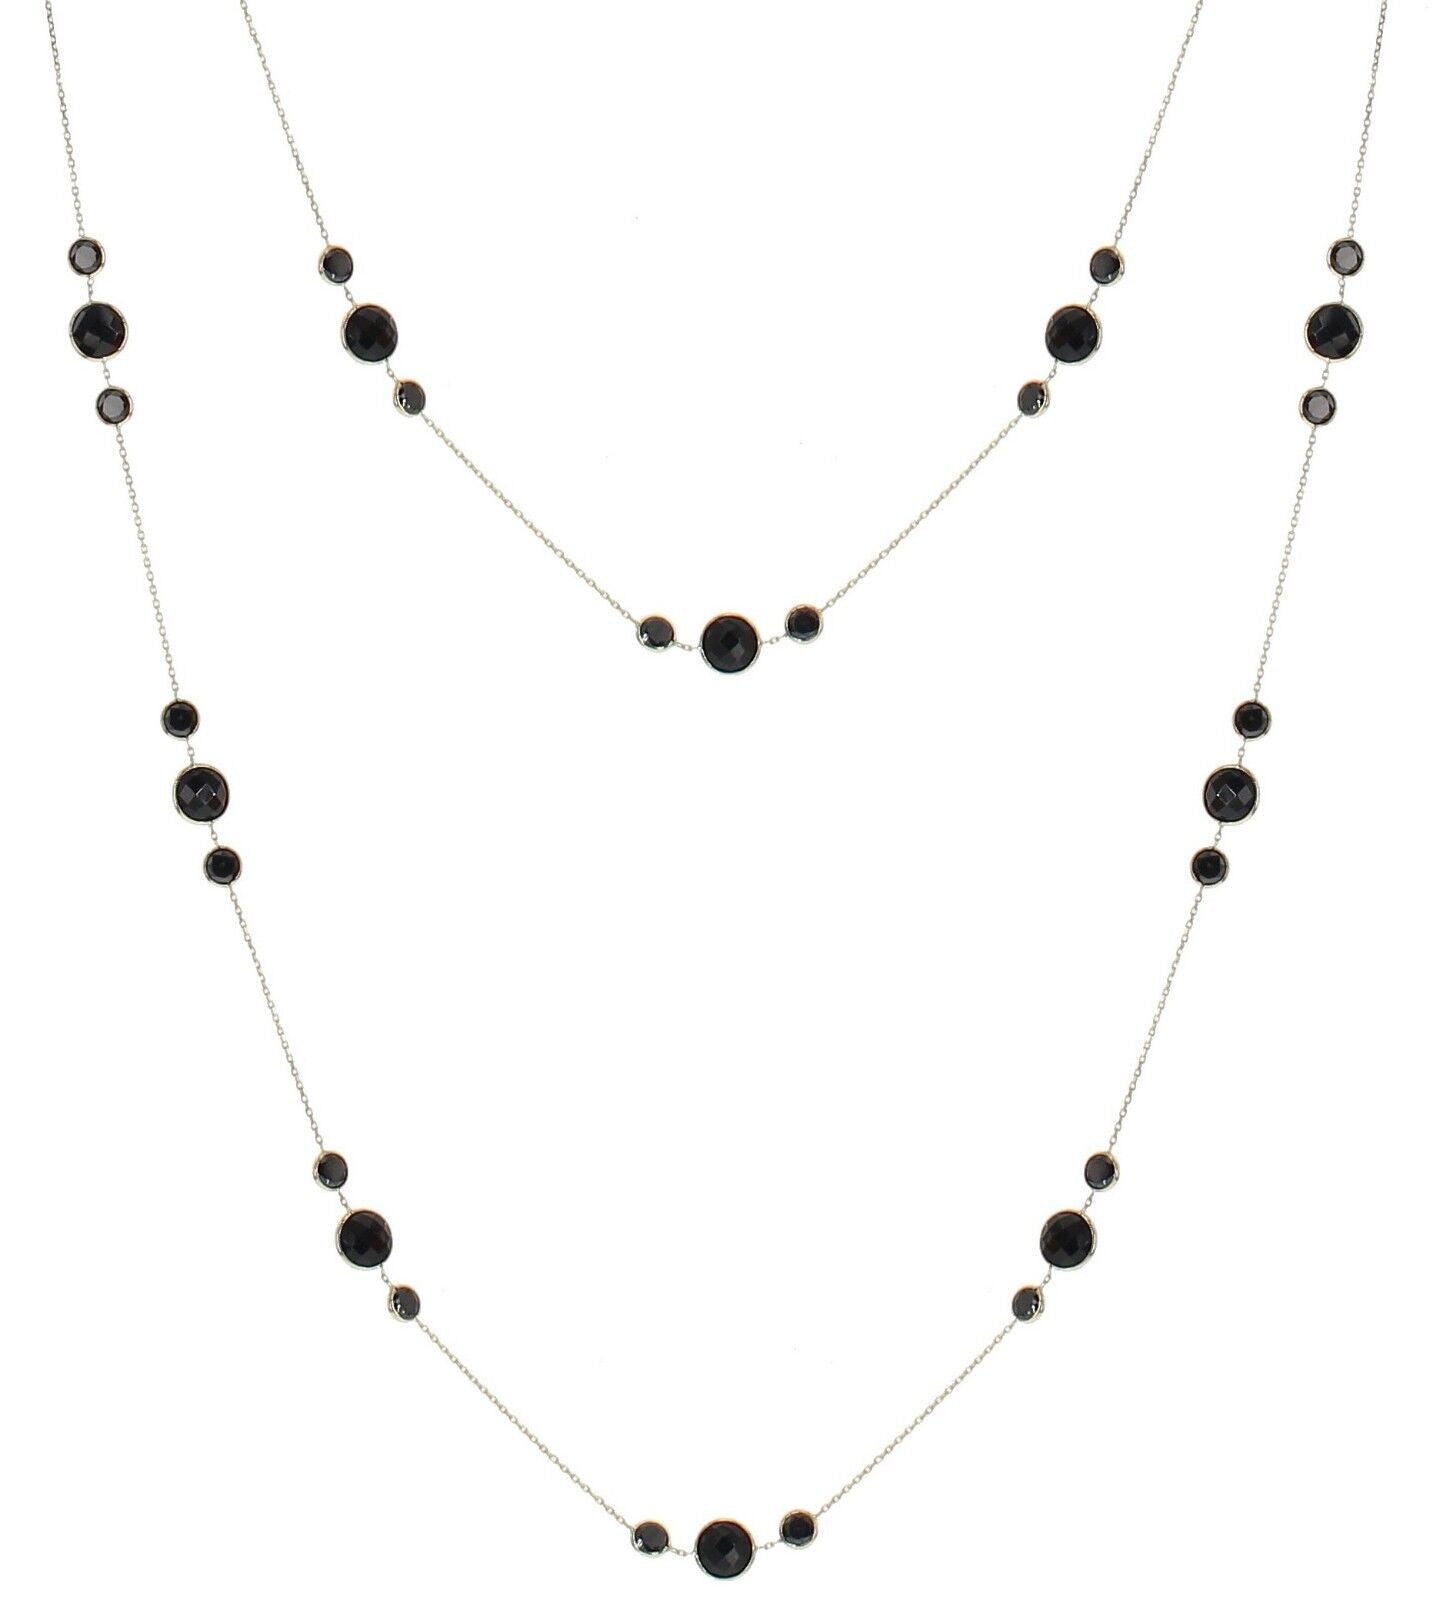 14K Yellow Gold Station Necklace With Black Onyx Gemstones  By The Yard 36 Inch